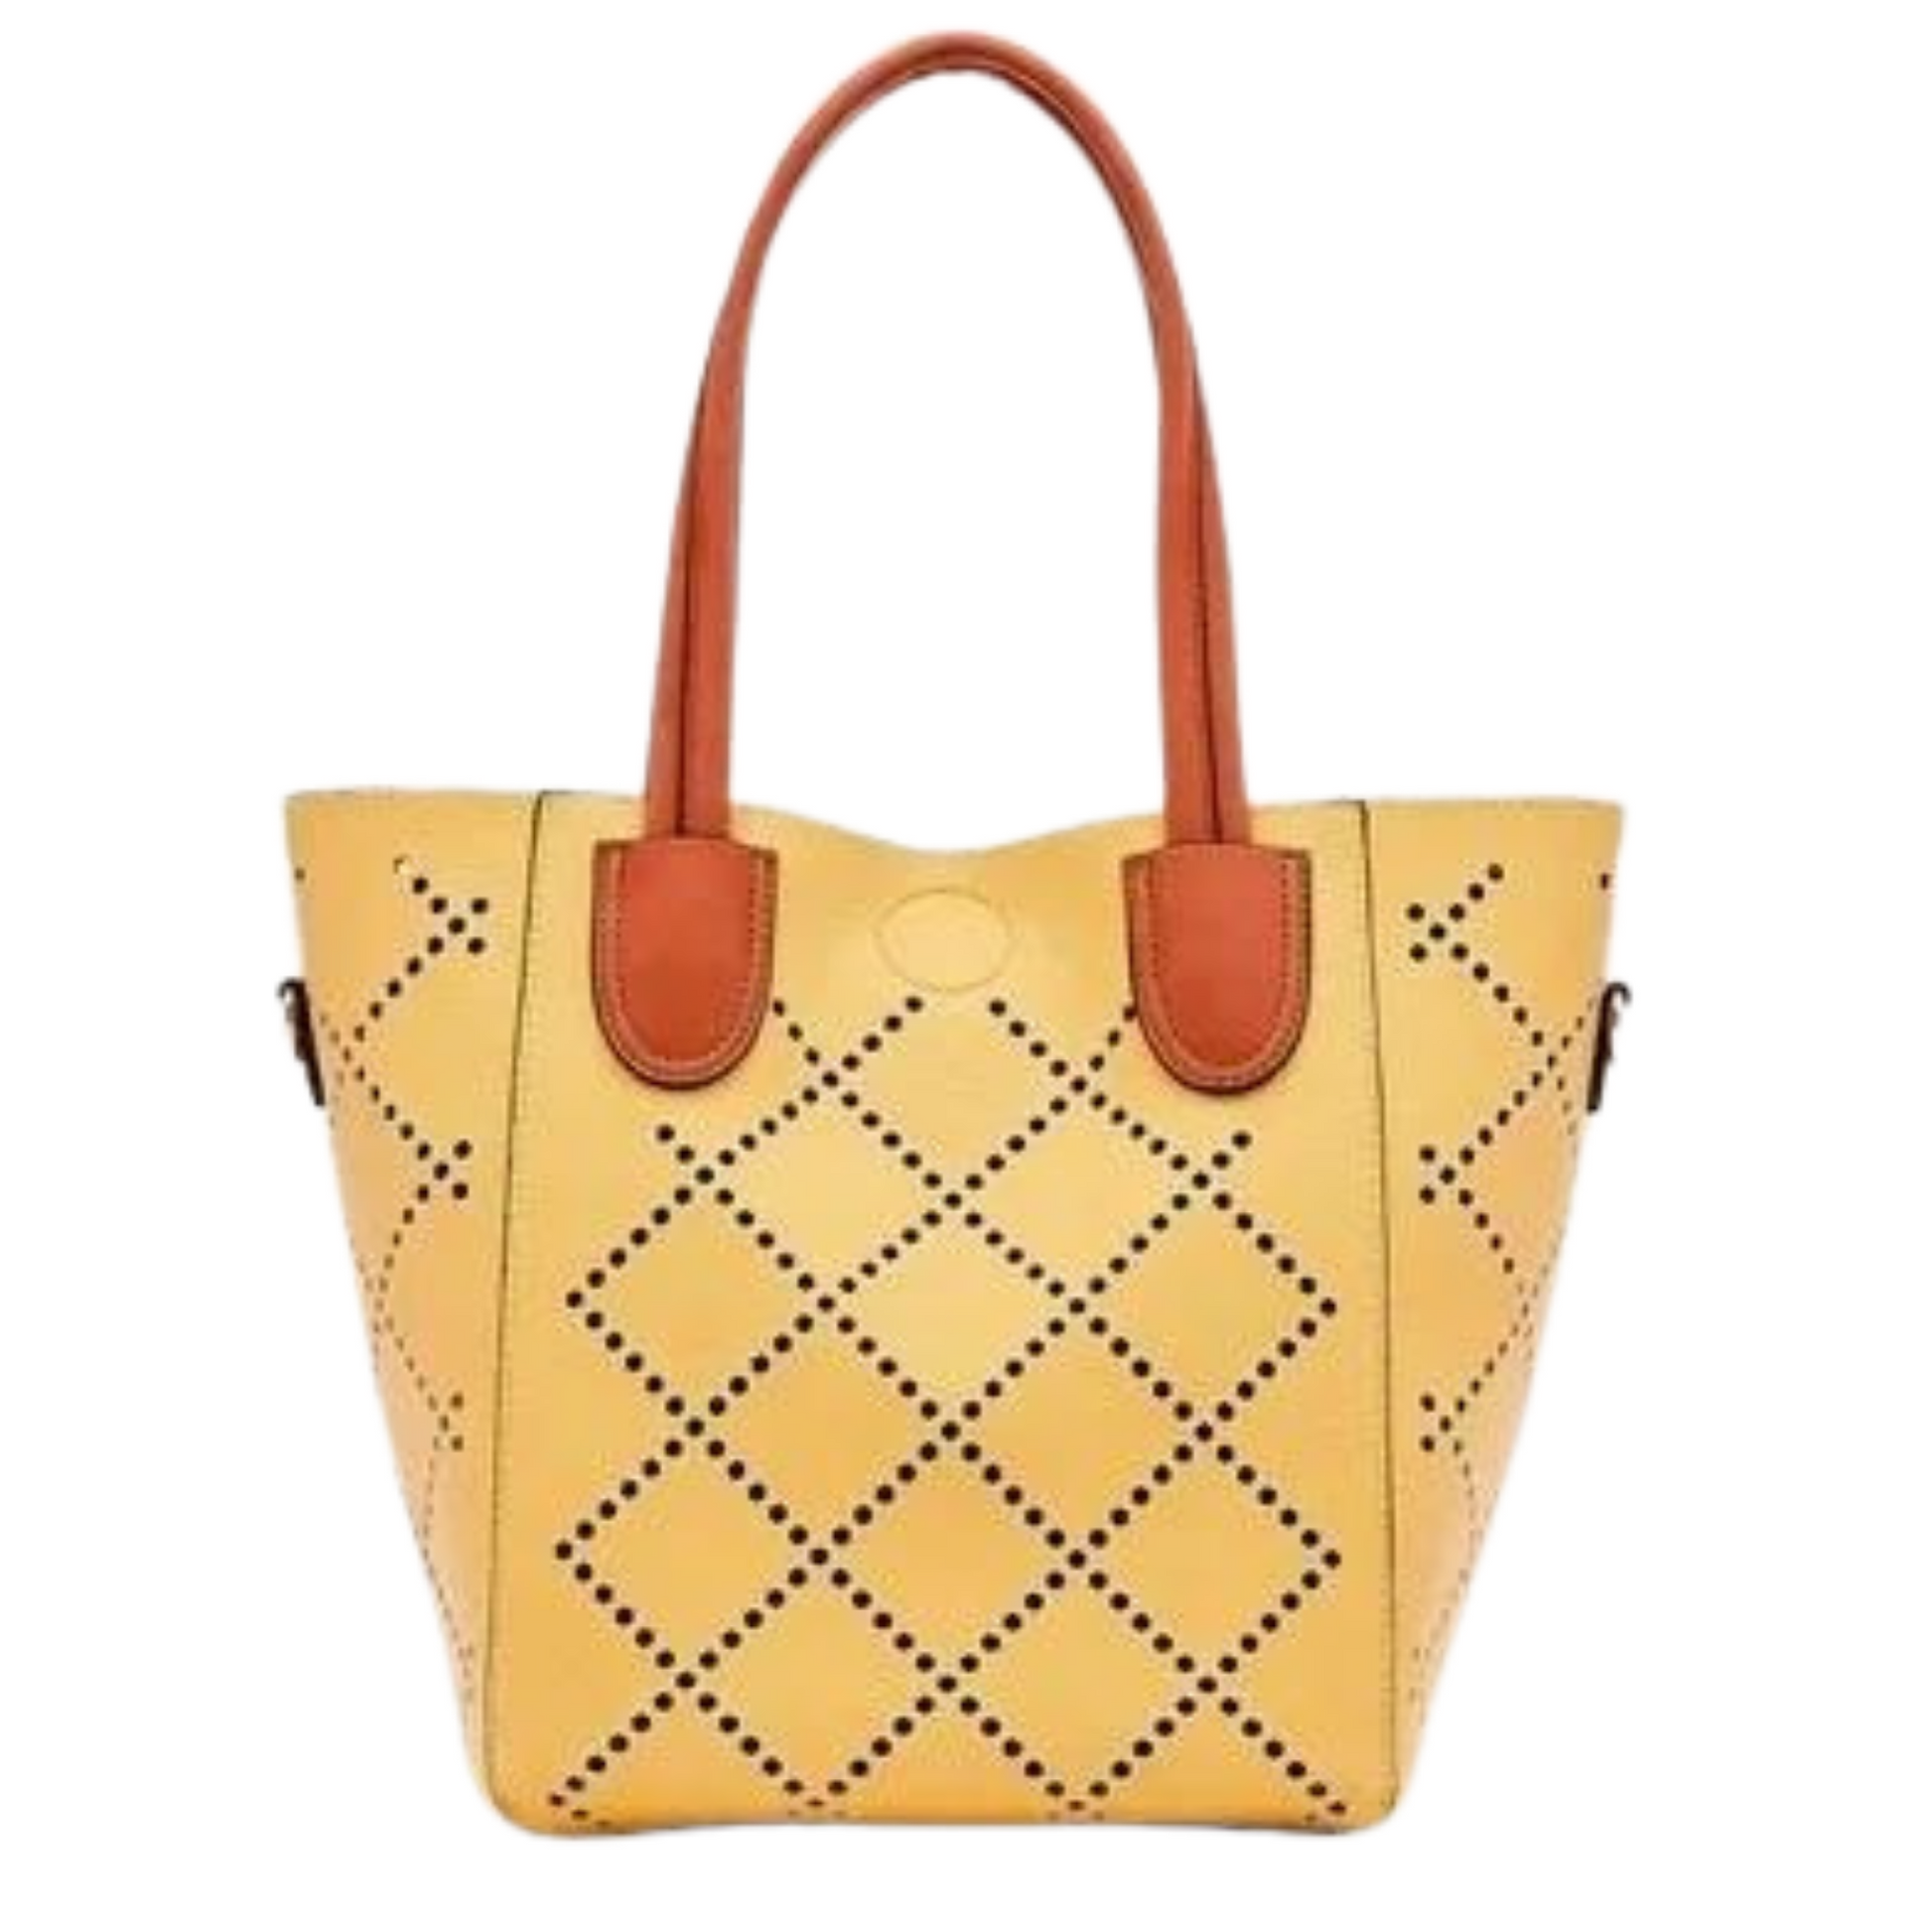 A front view of the Yellow bag showing the unique crisscross design and the leather straps.